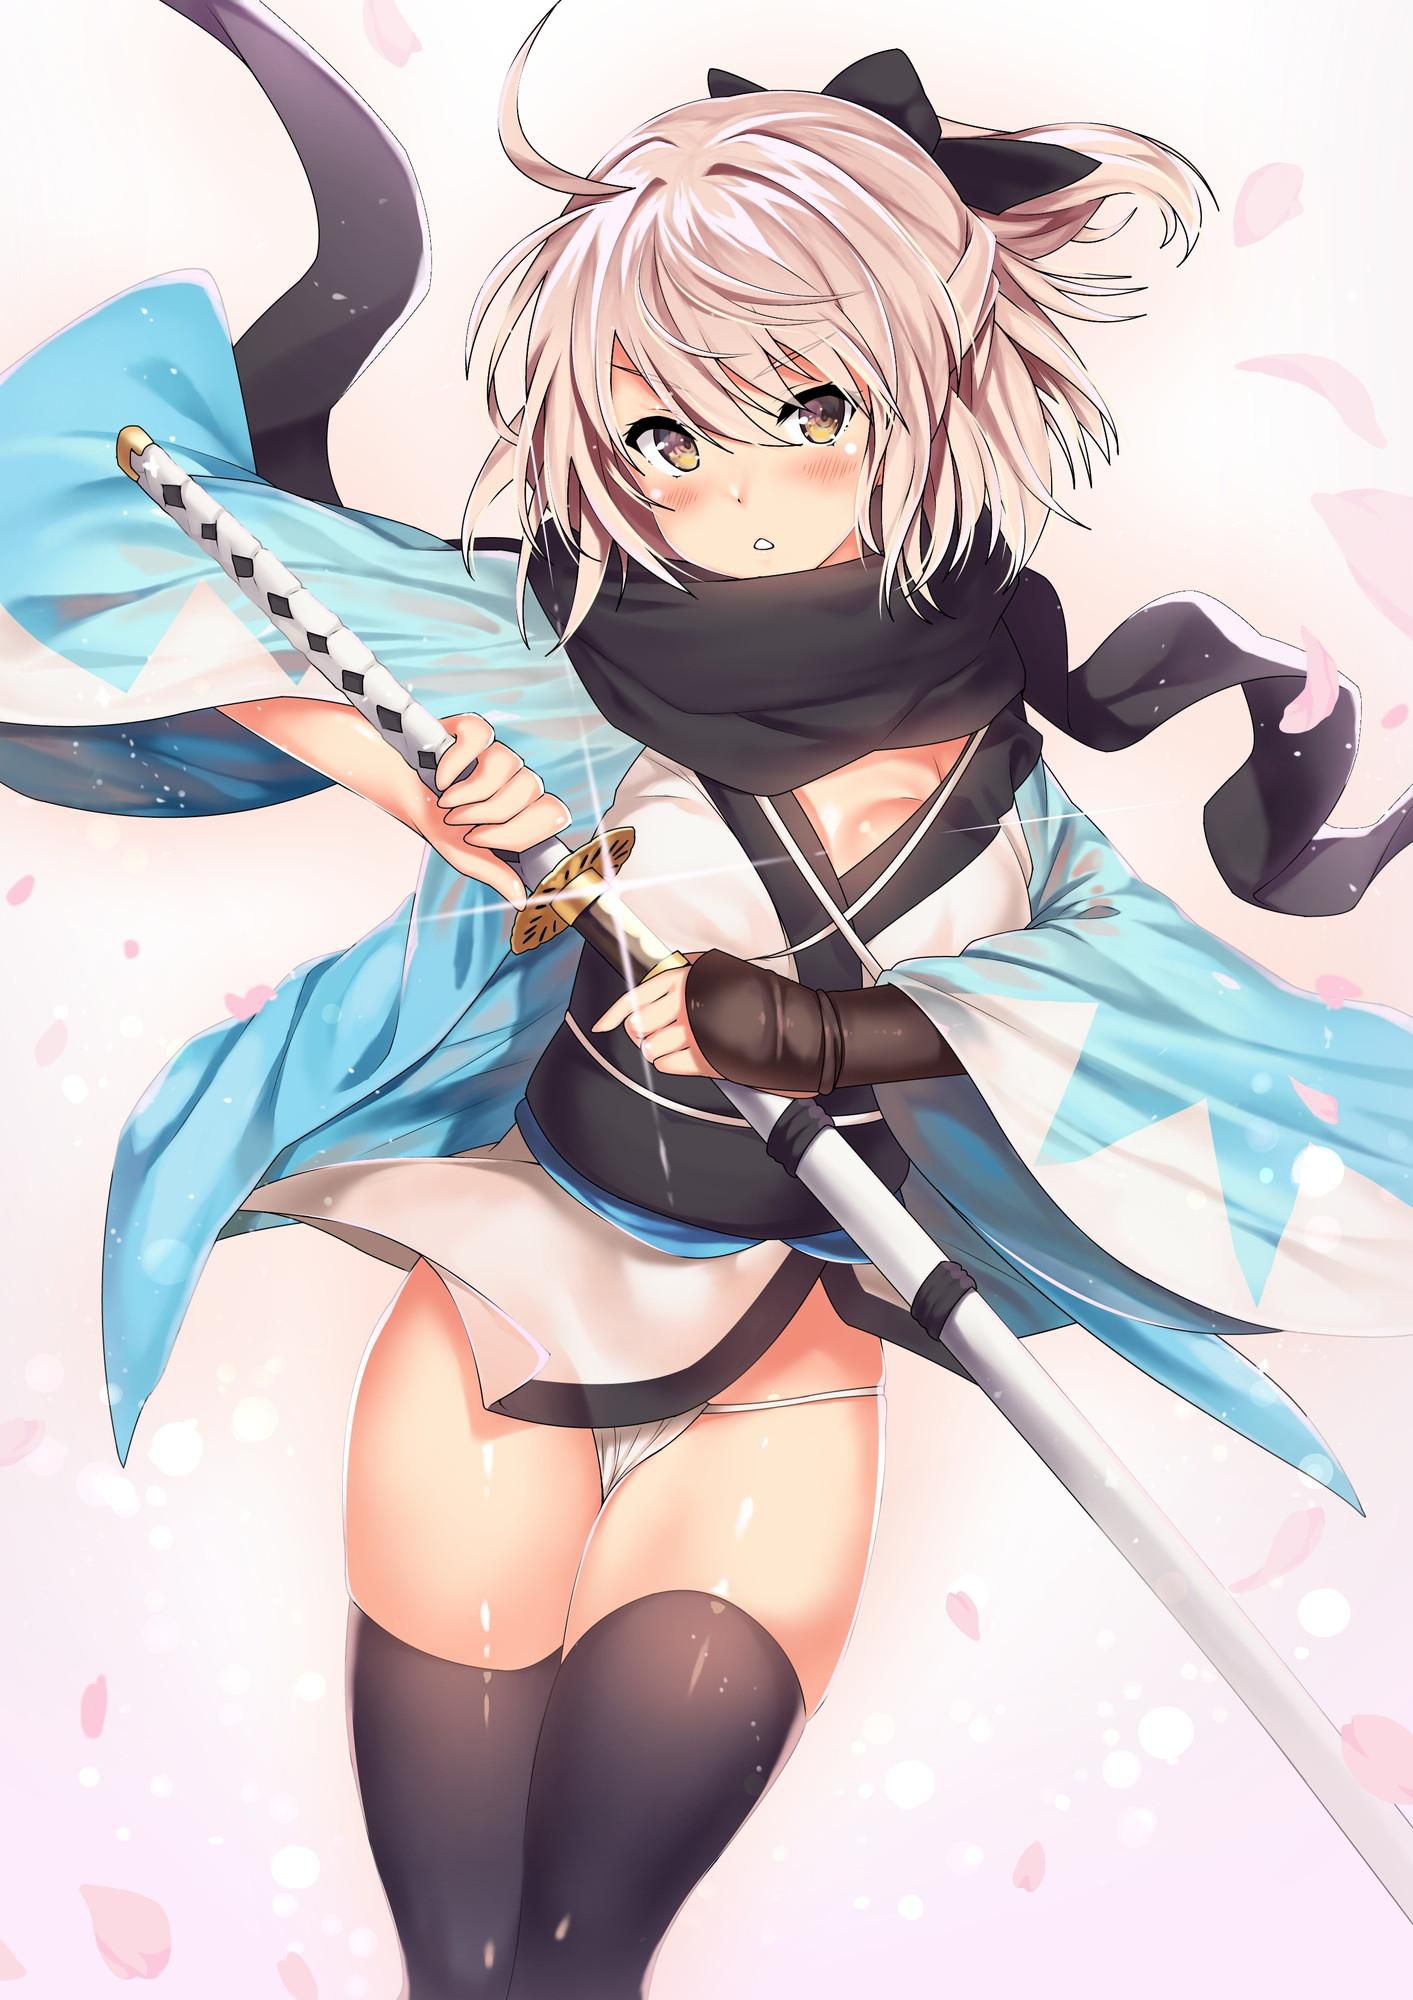 【Erotic Image】 Okita's character image that you want to refer to fate grand order erotic cosplay 18